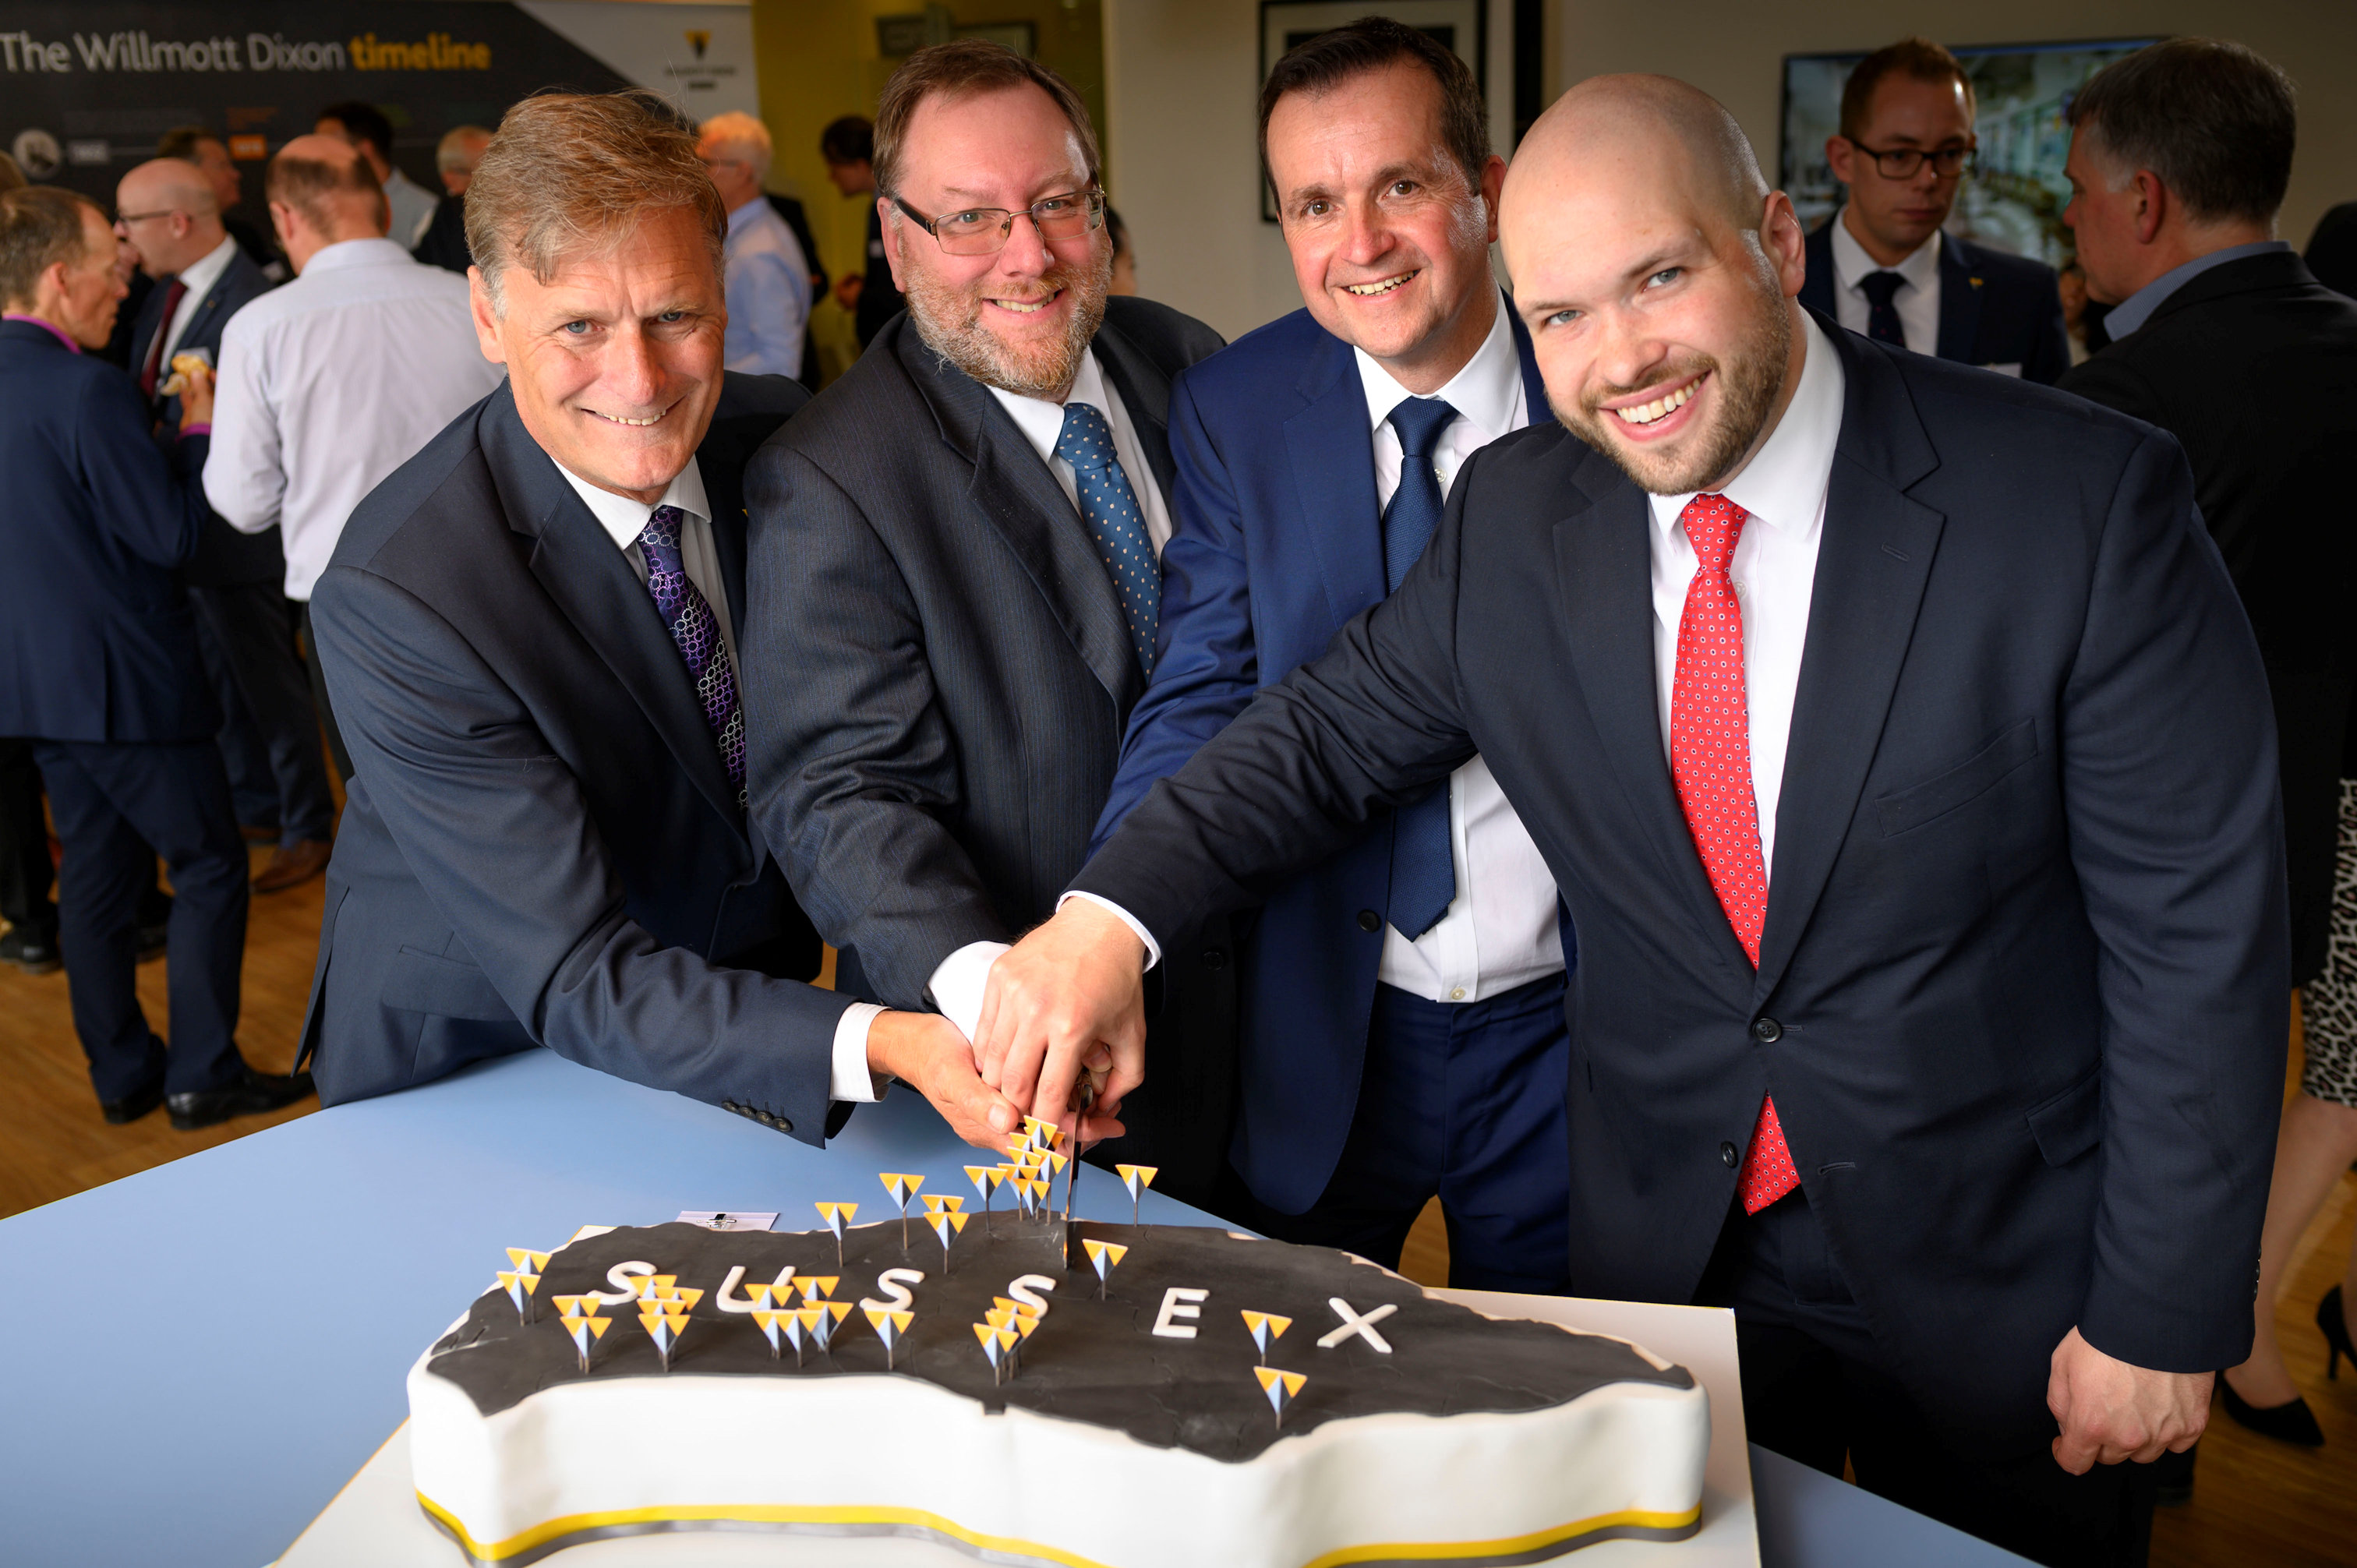 Sussex office opening - May 2019 - cake.jpg